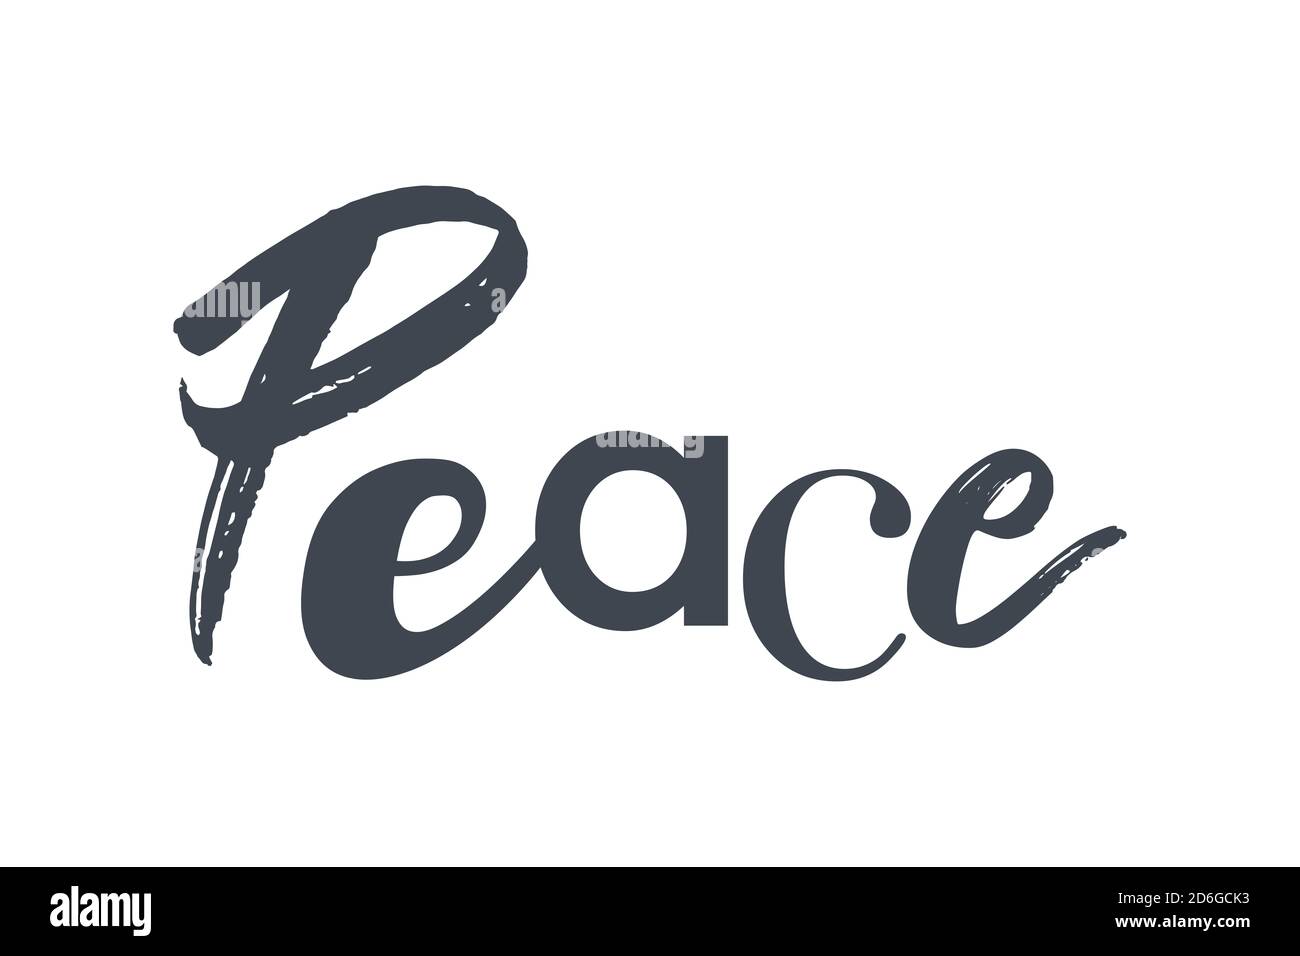 Modern, playful graphic design of a word 'Peace' in grey color. Urban, fun, creative typography. Stock Photo